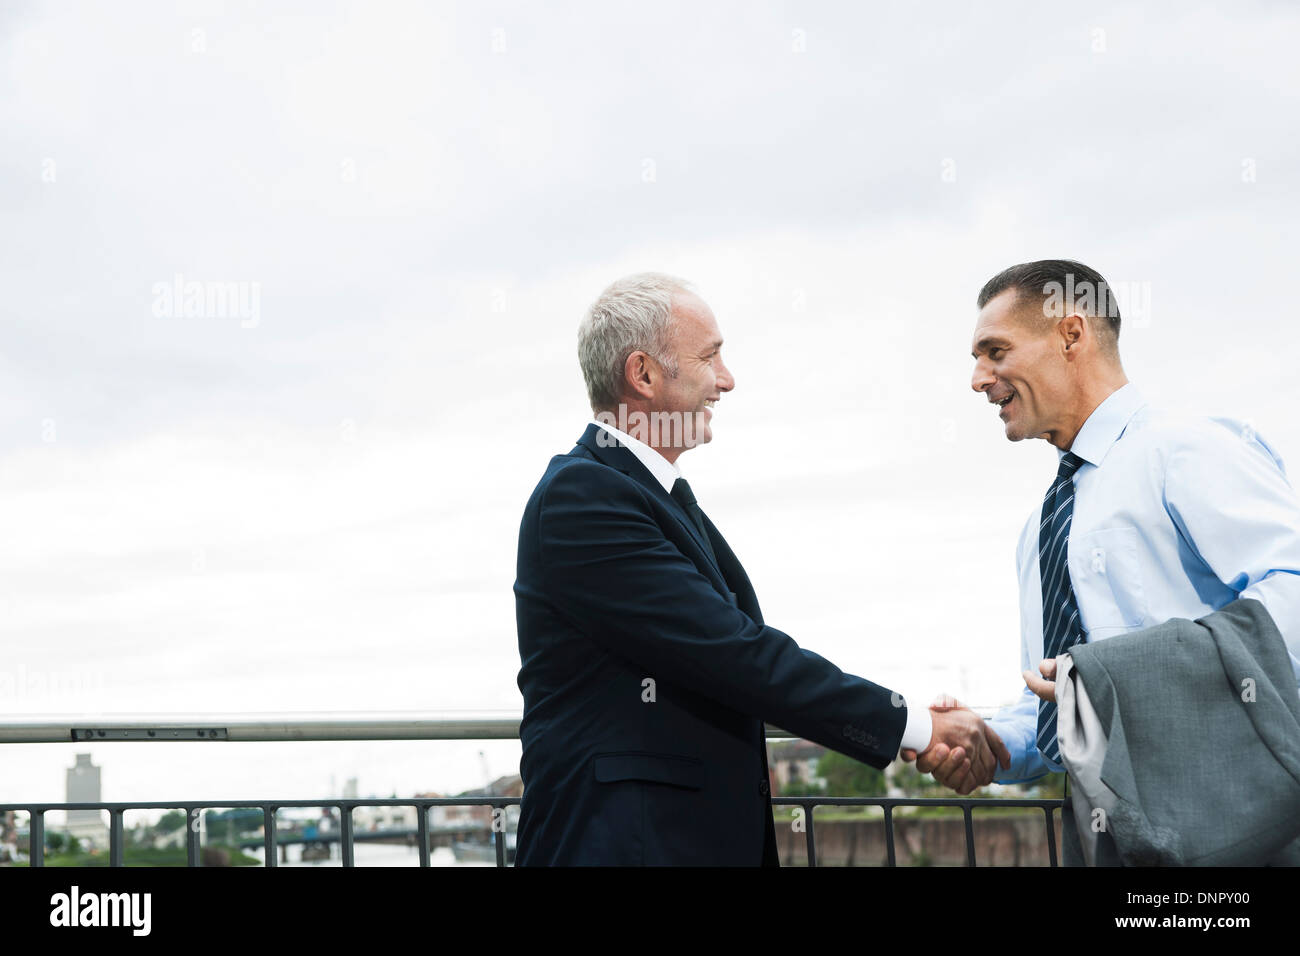 Mature businessmen standing by railing, shaking hands outdoors, Mannheim, Germany Stock Photo